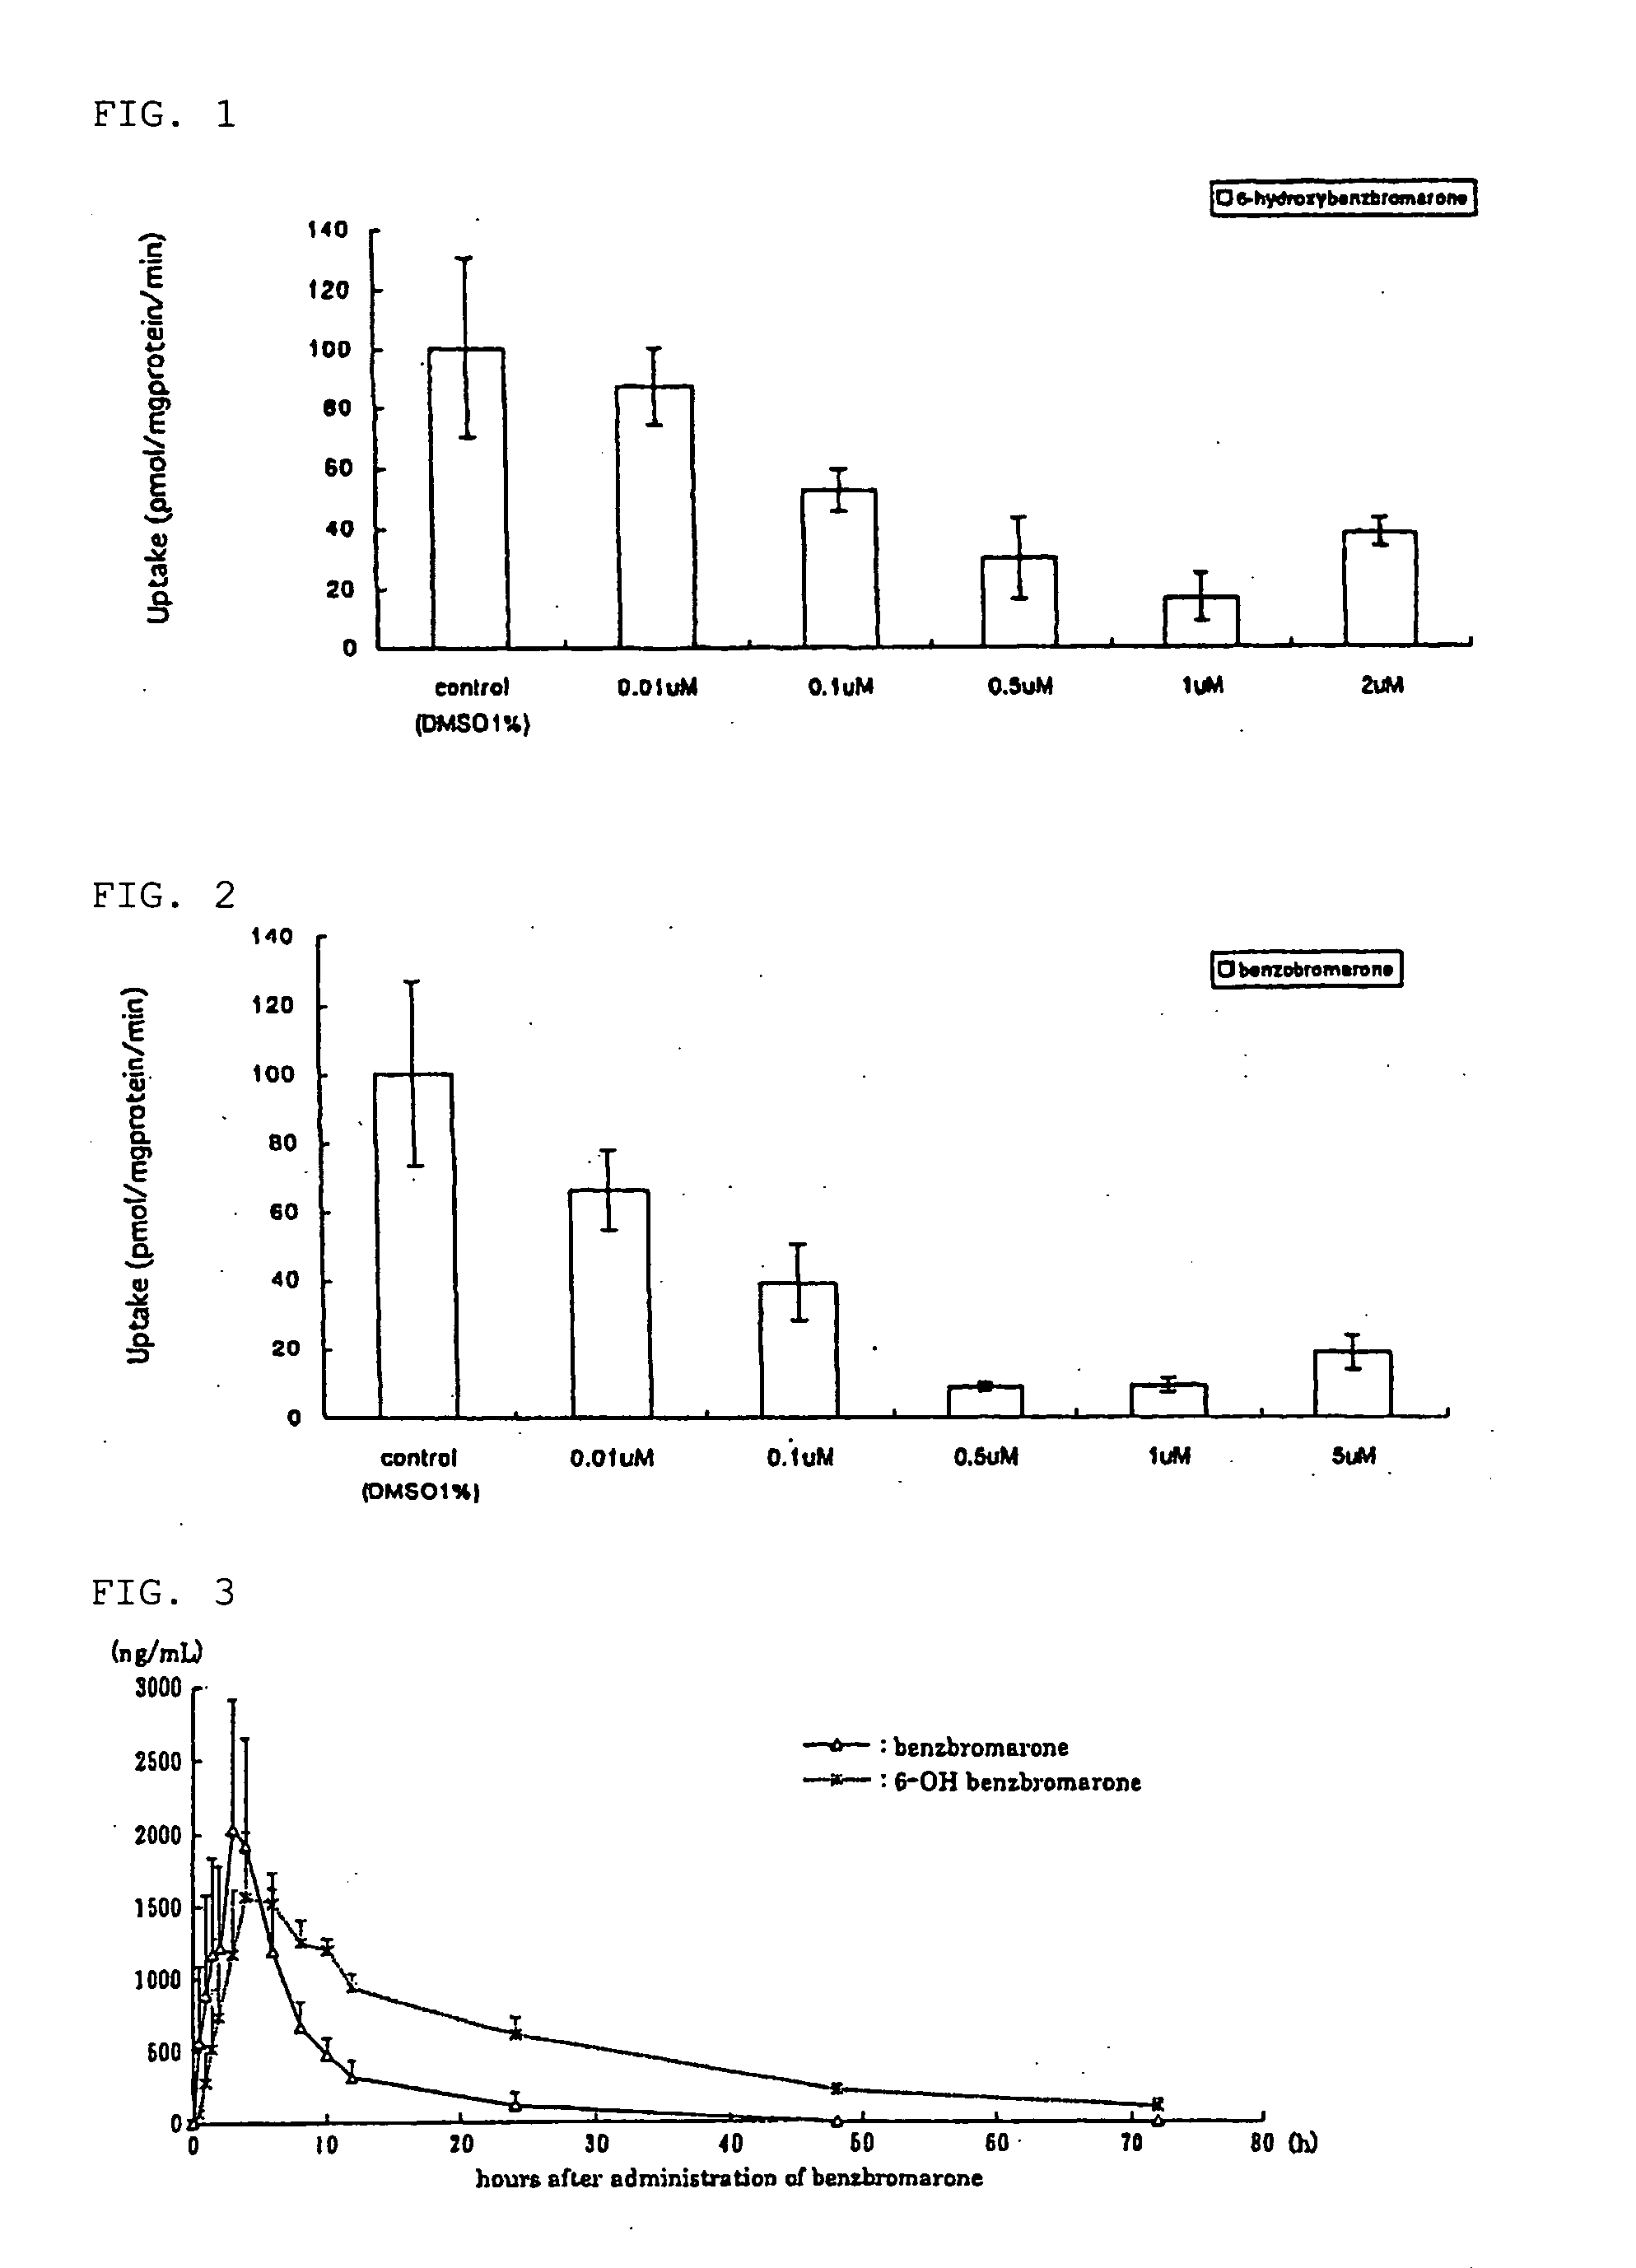 Medicinal compositions containing 6-hydroxybenzbromarone or salts thereof